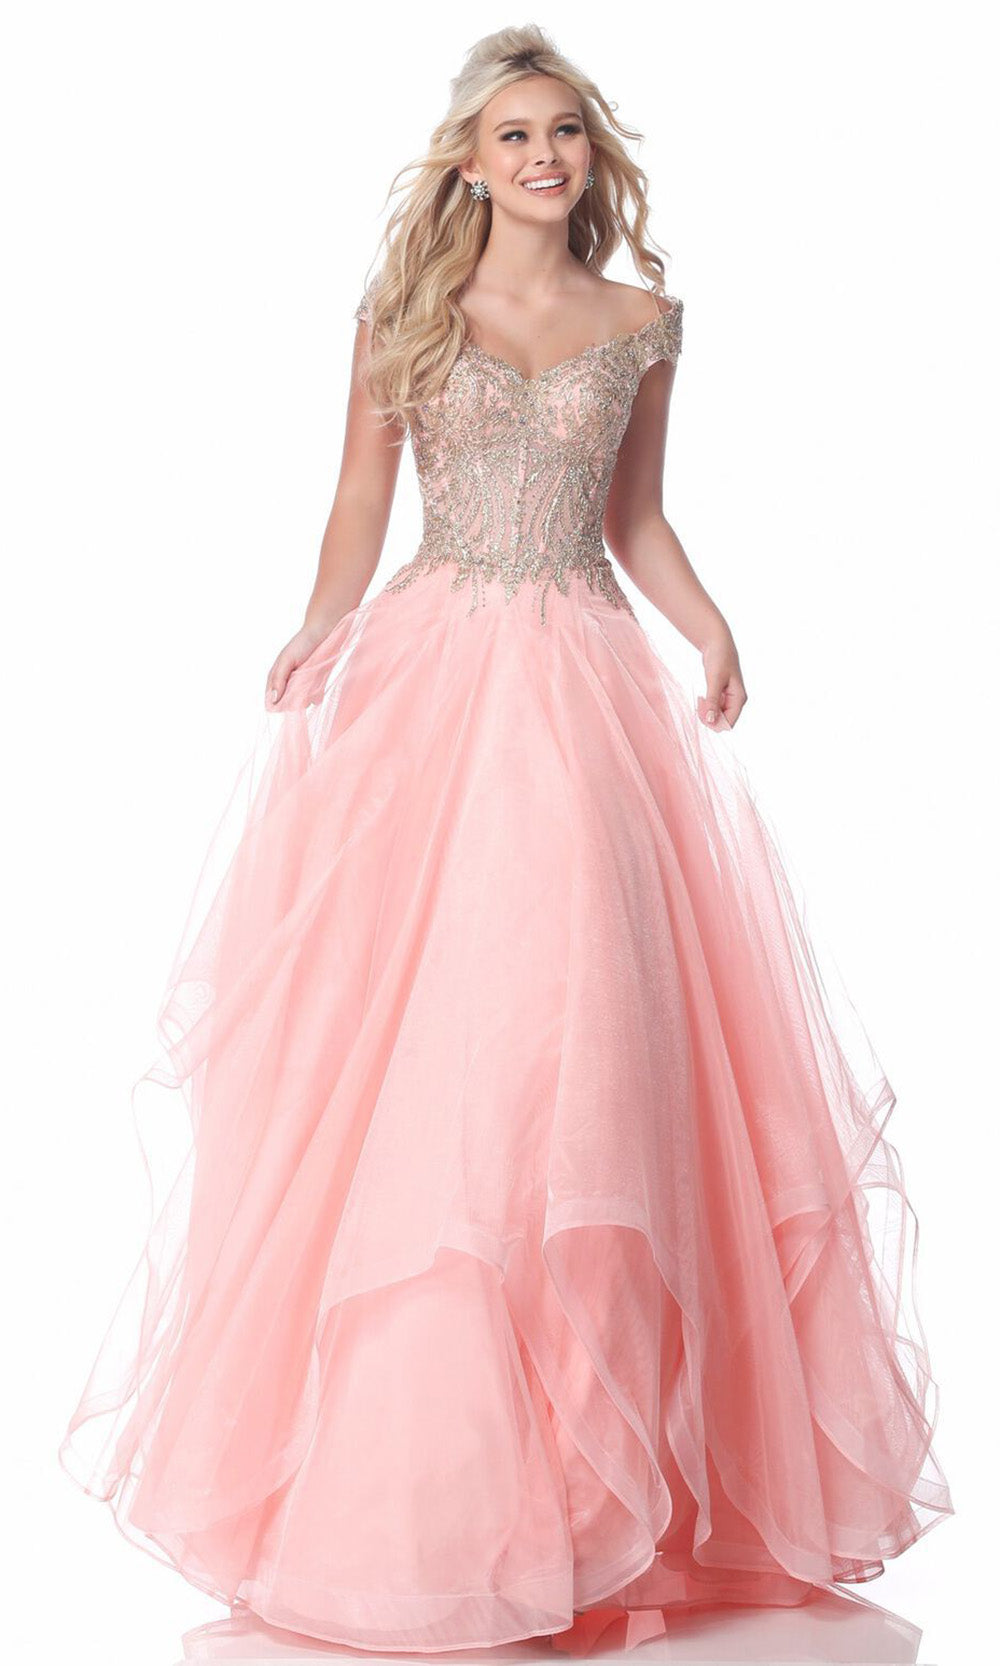 Sherri Hill - 51614SC Metallic Lace Off Shoulder Layered Evening Gown In Pink and Gold